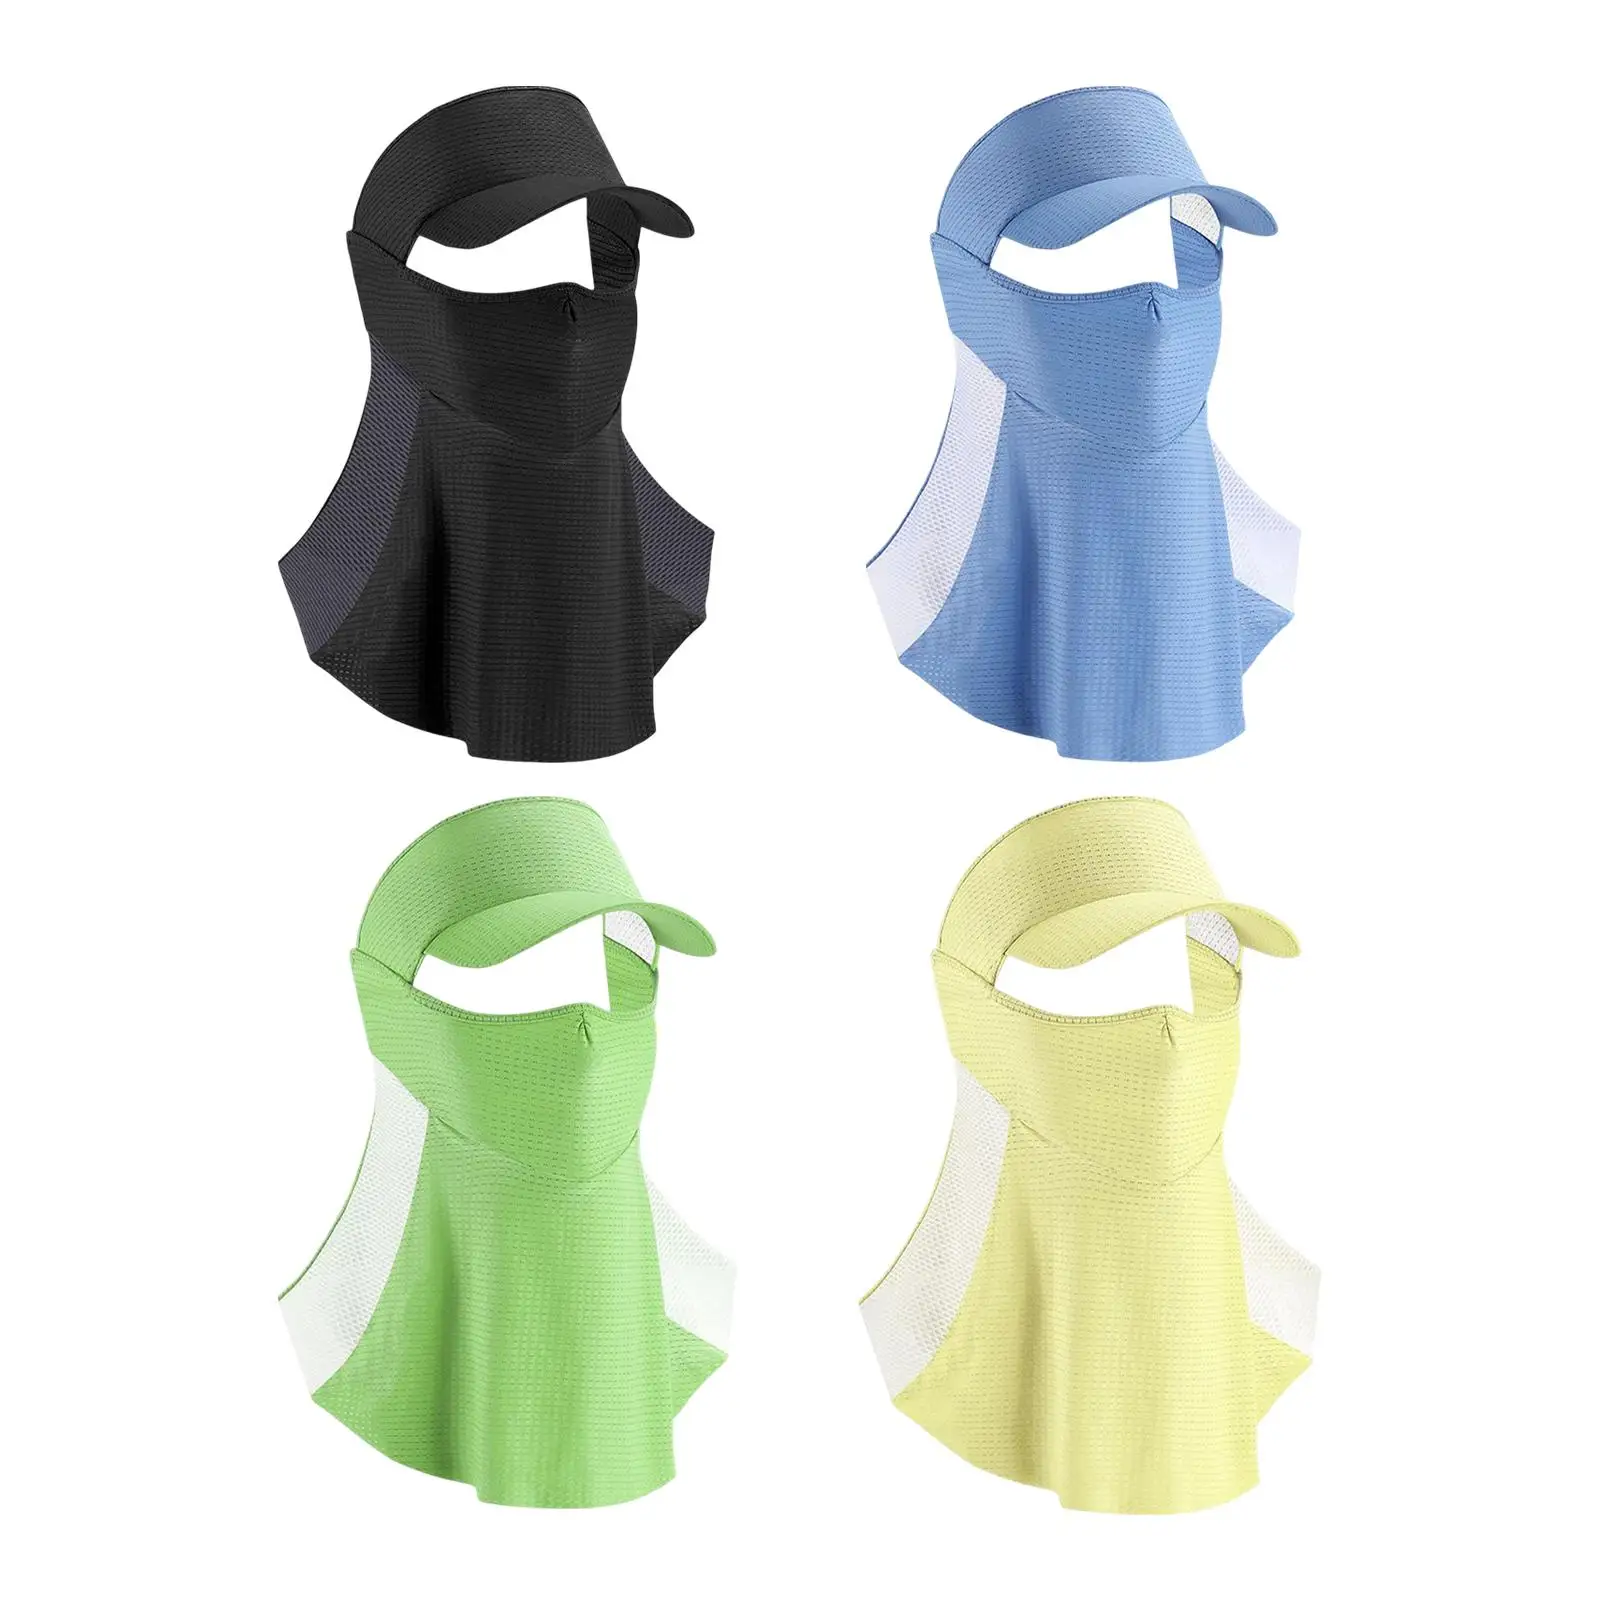 Neck Gaiter Face Cover Durable Sun Cap Sun Protection Face Mask Breathable Neck Cover for Outdoor Fishing Hiking Camping Driving